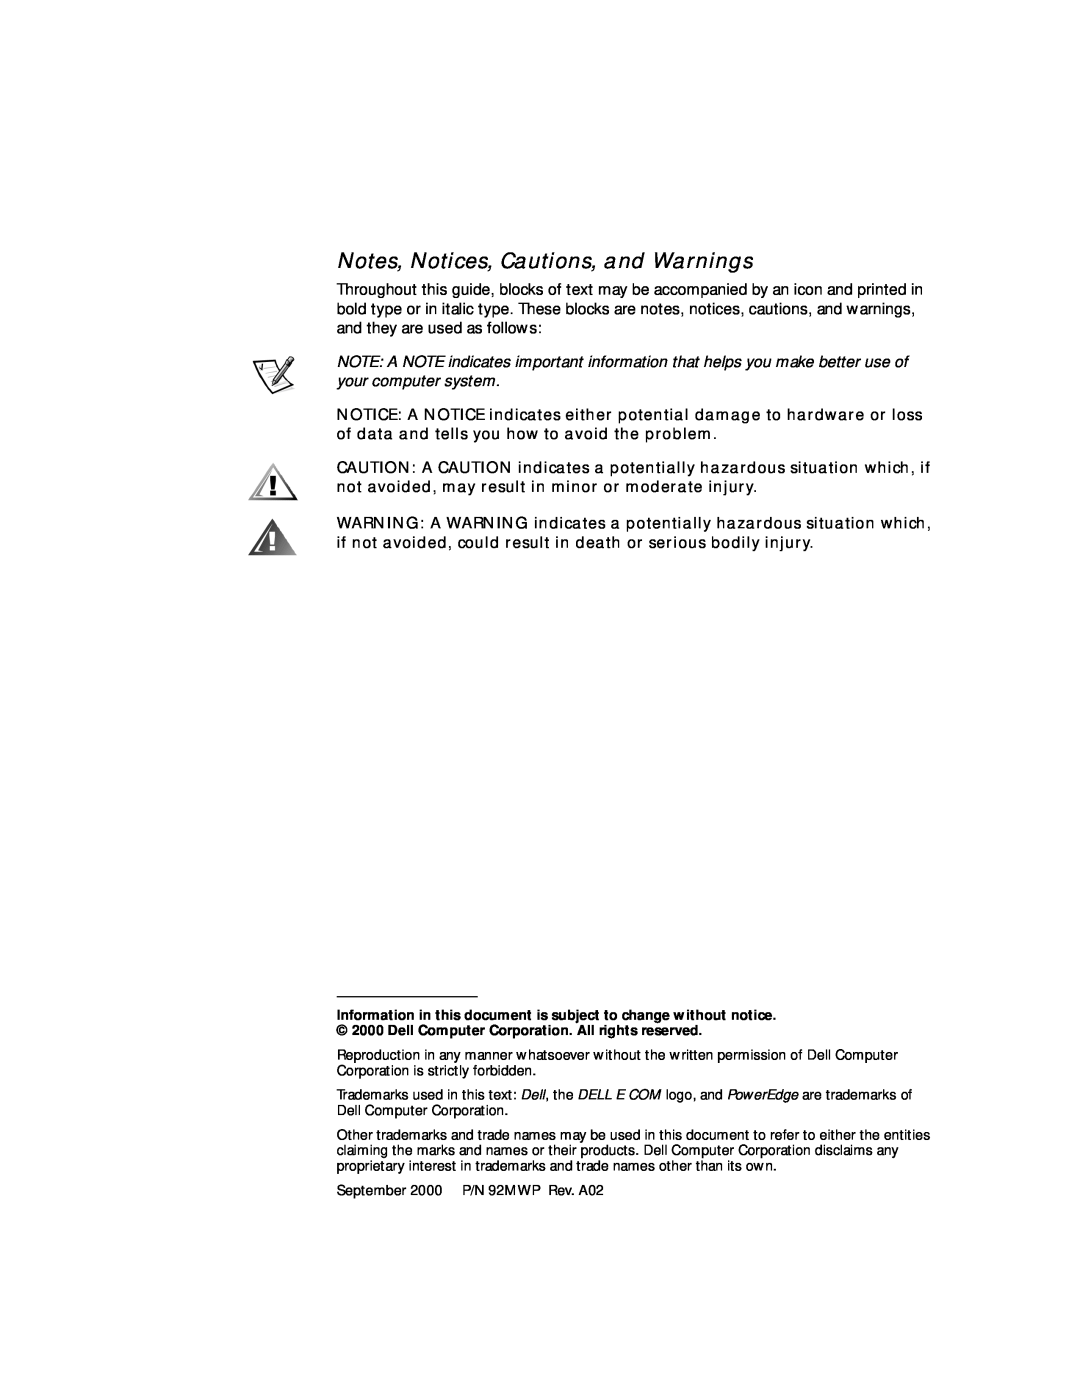 Dell 2400 manual Notes, Notices, Cautions, and Warnings 